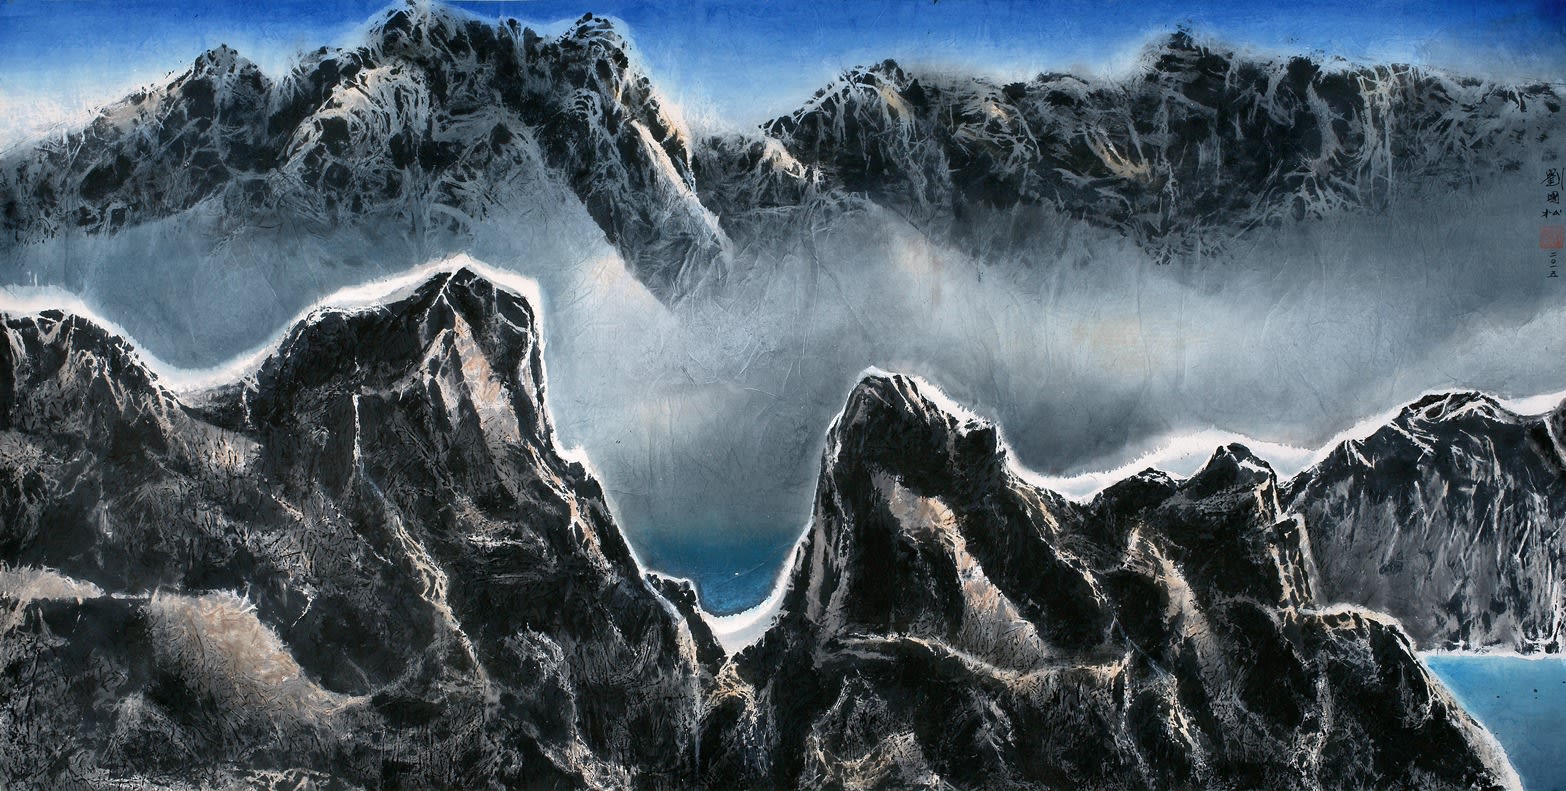 Liu Kuo-Sung 劉國松, Floating mountains 群山浮動, 2015